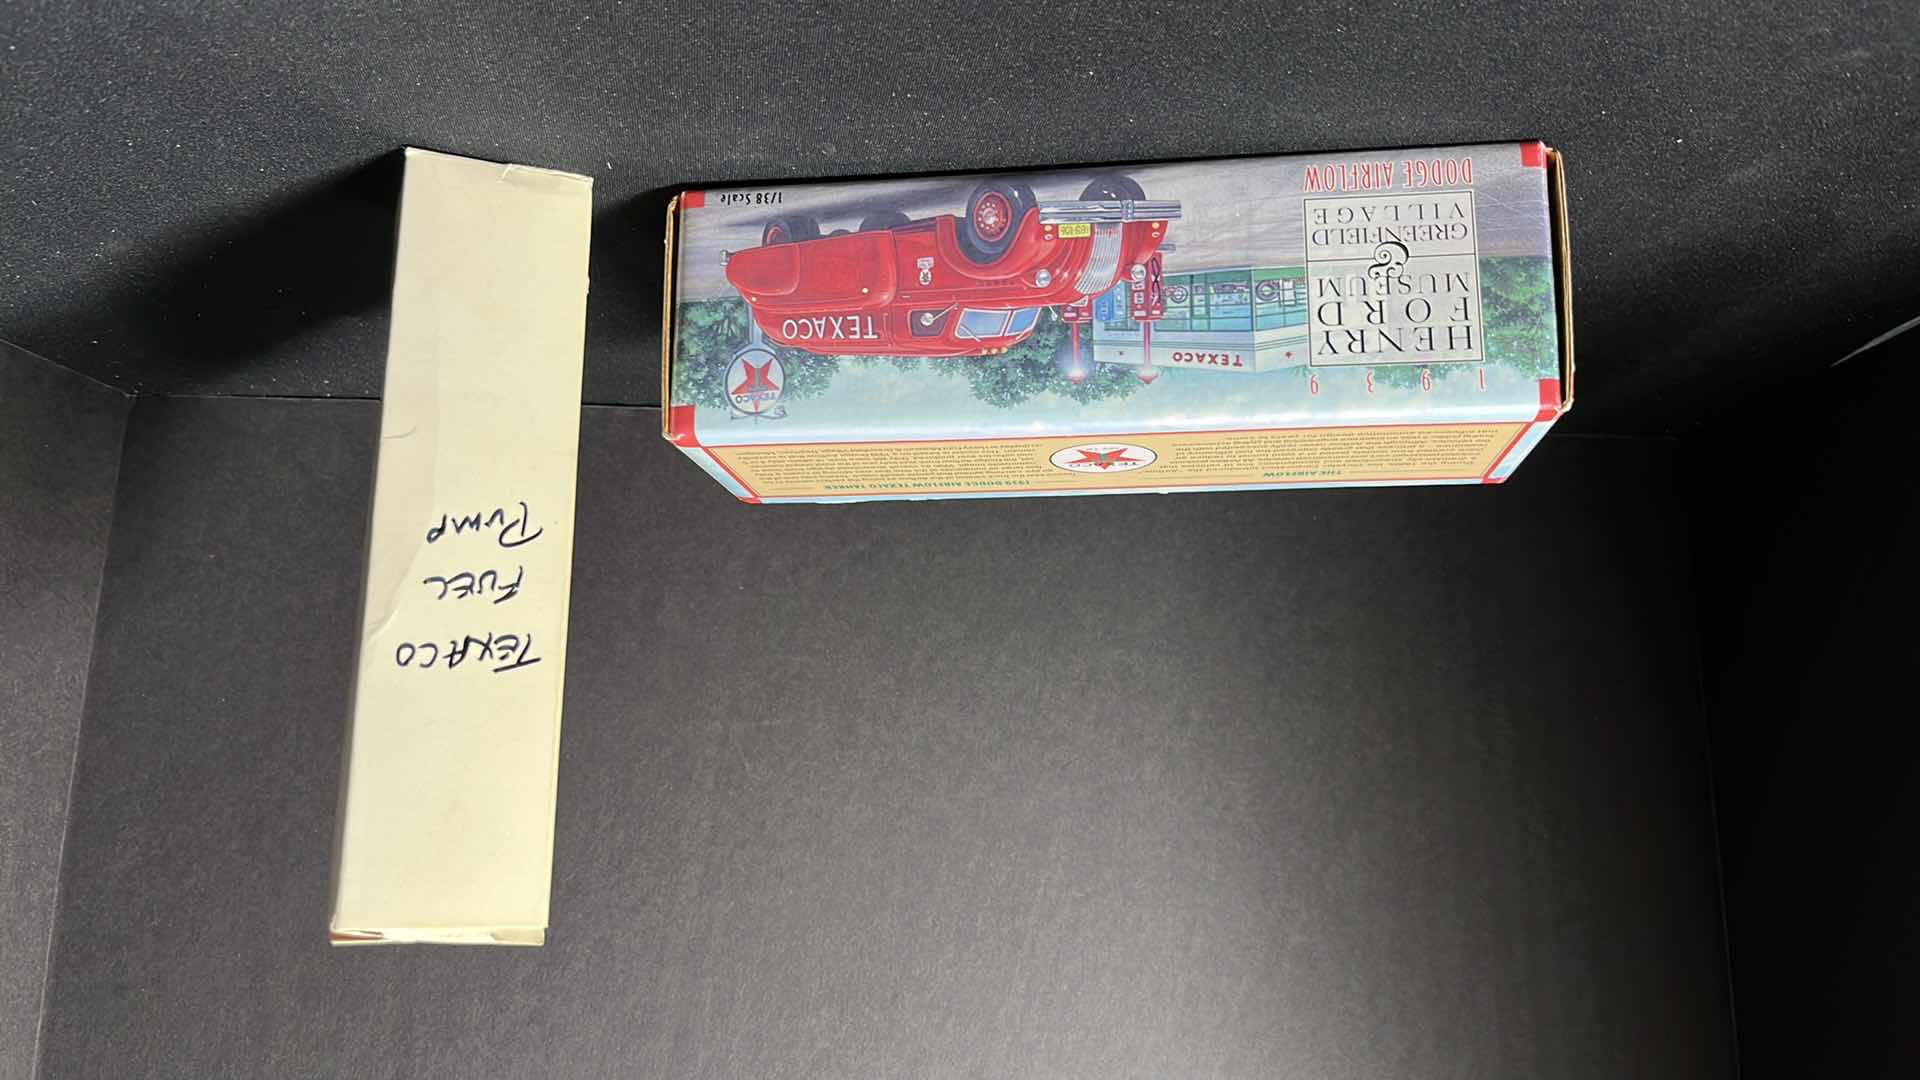 Photo 15 of ERTL COLLECTIBLES, 1997 TEXACO HENRY FORD MUSEUM & GREENFIELD VILLAGE DIE-CAST REPLICA 1939 DODGE AIRFLOW AND VINTAGE MINIATURE GAS CYLINDER PUMP 7.5”
$25
$15